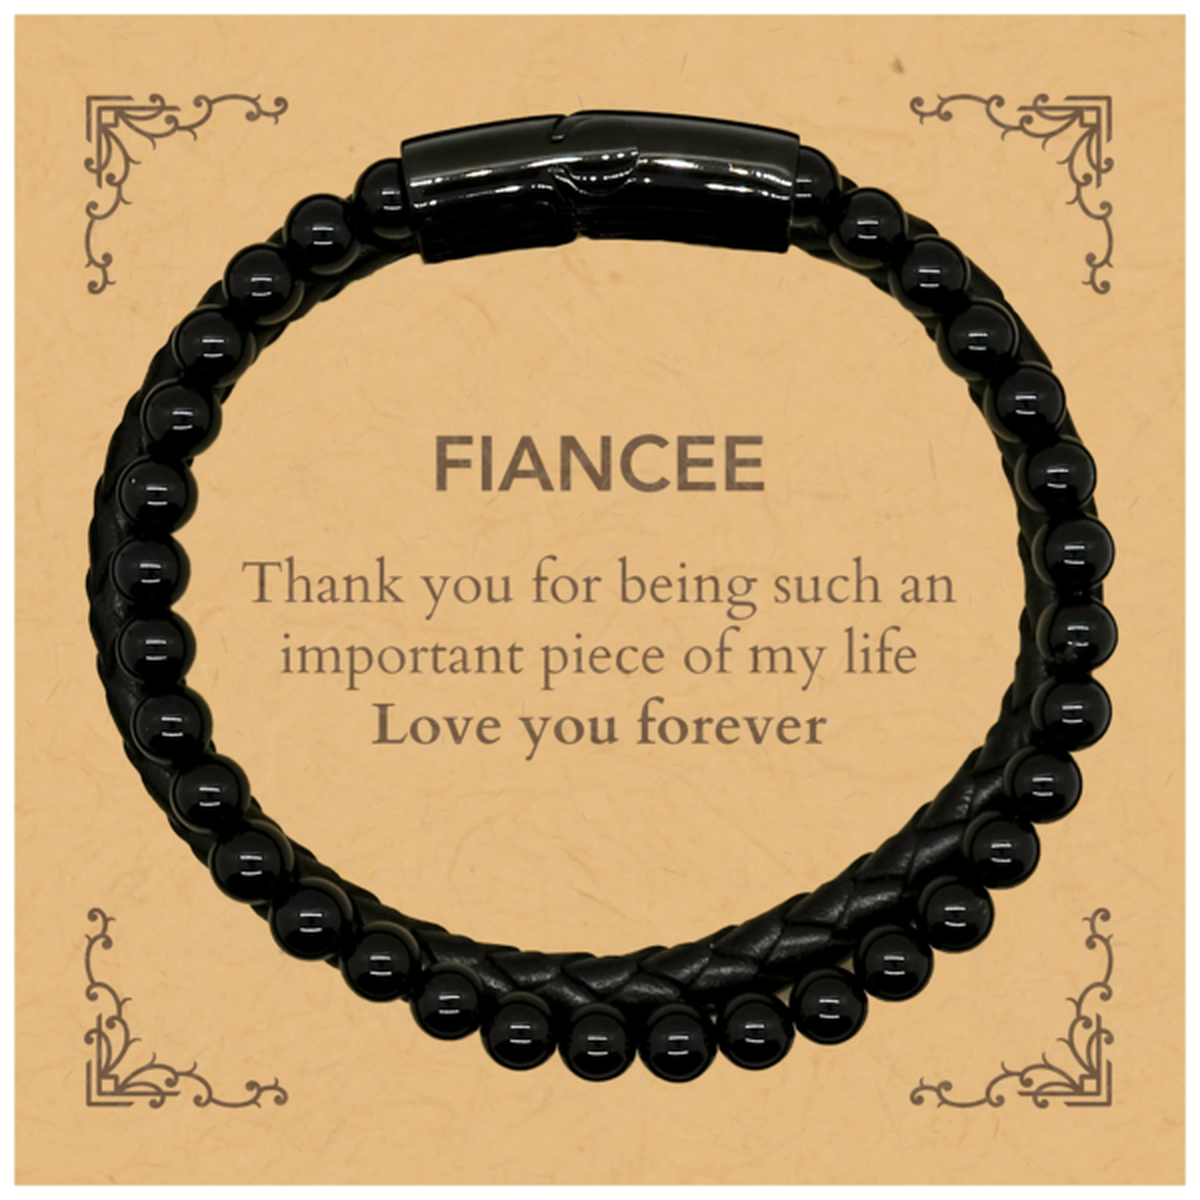 Appropriate Fiancee Stone Leather Bracelets Epic Birthday Gifts for Fiancee Thank you for being such an important piece of my life Fiancee Christmas Mothers Fathers Day